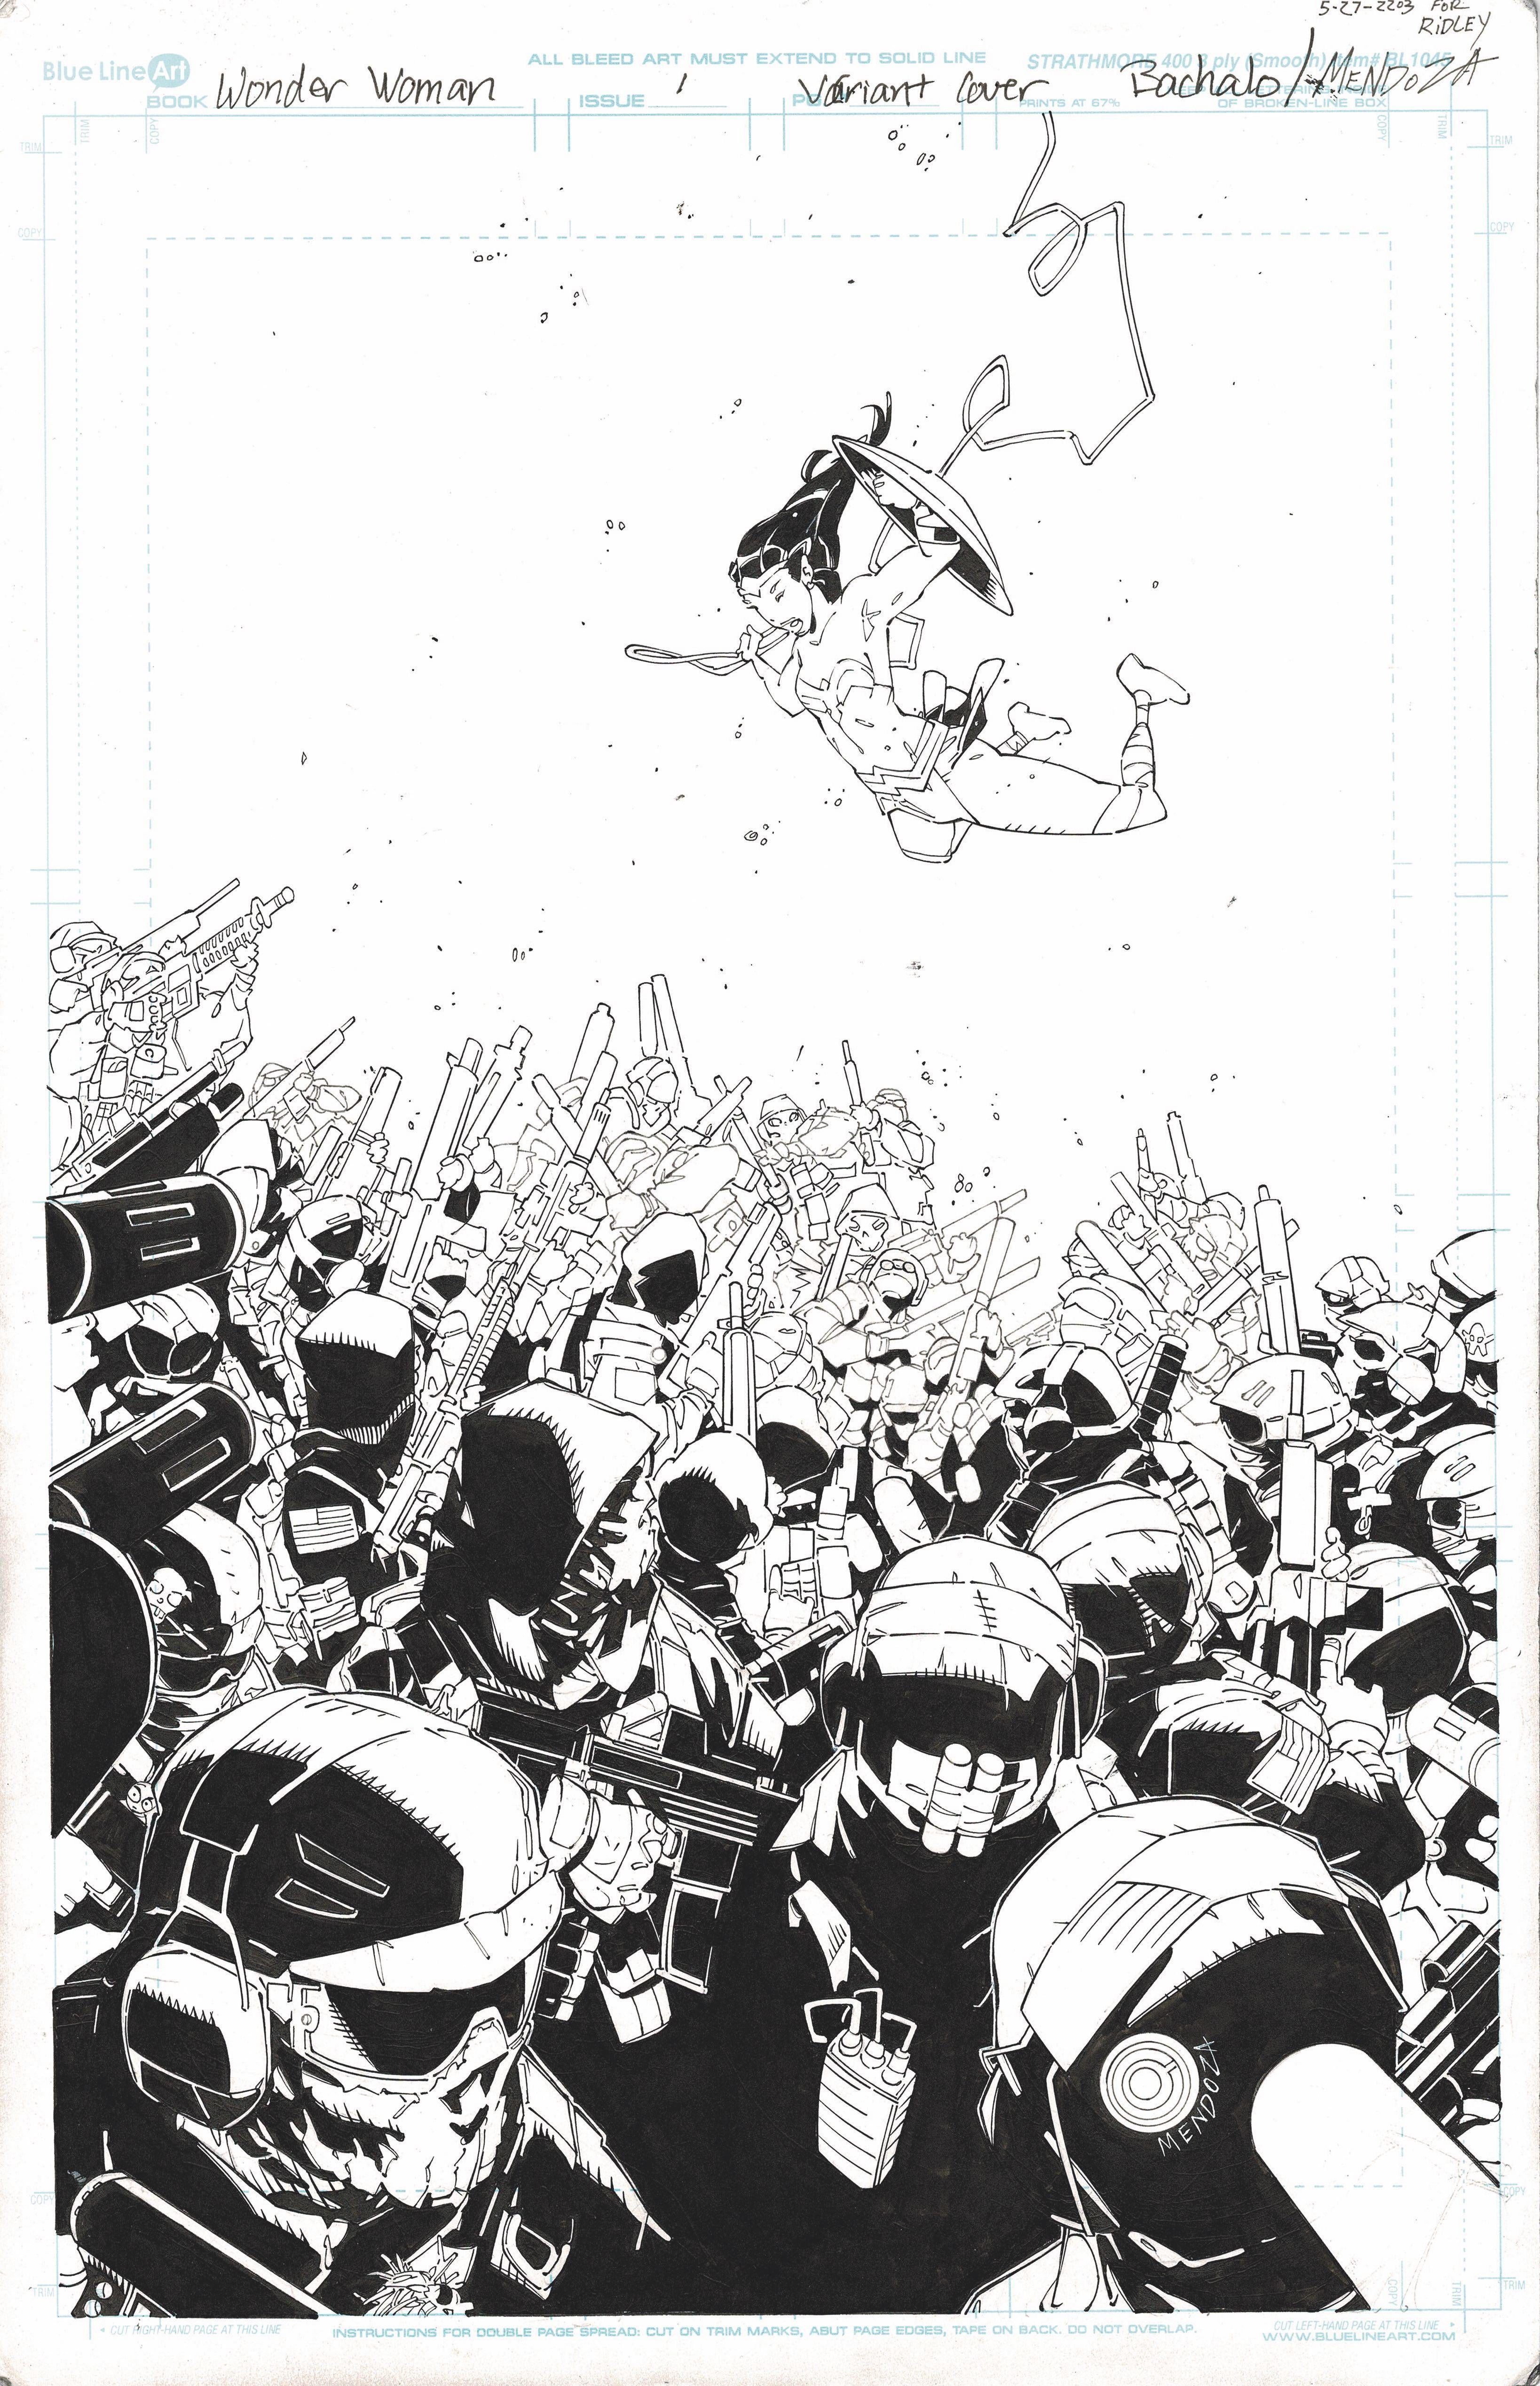 wonder-woman-1-special-foil-variant-bachalo-wip.jpg